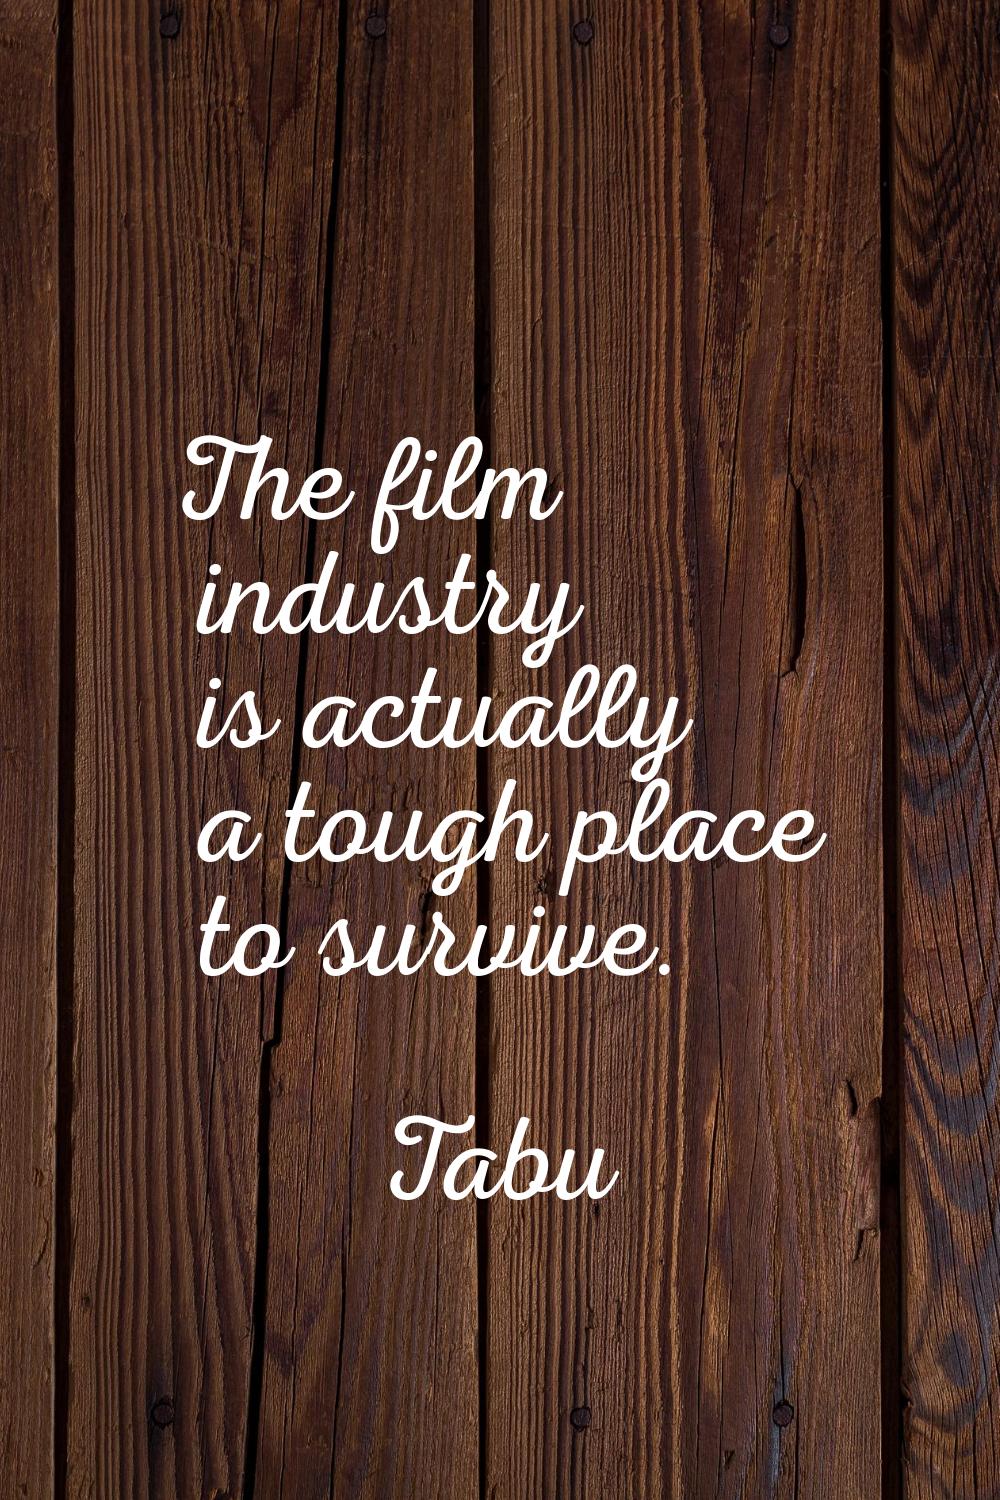 The film industry is actually a tough place to survive.